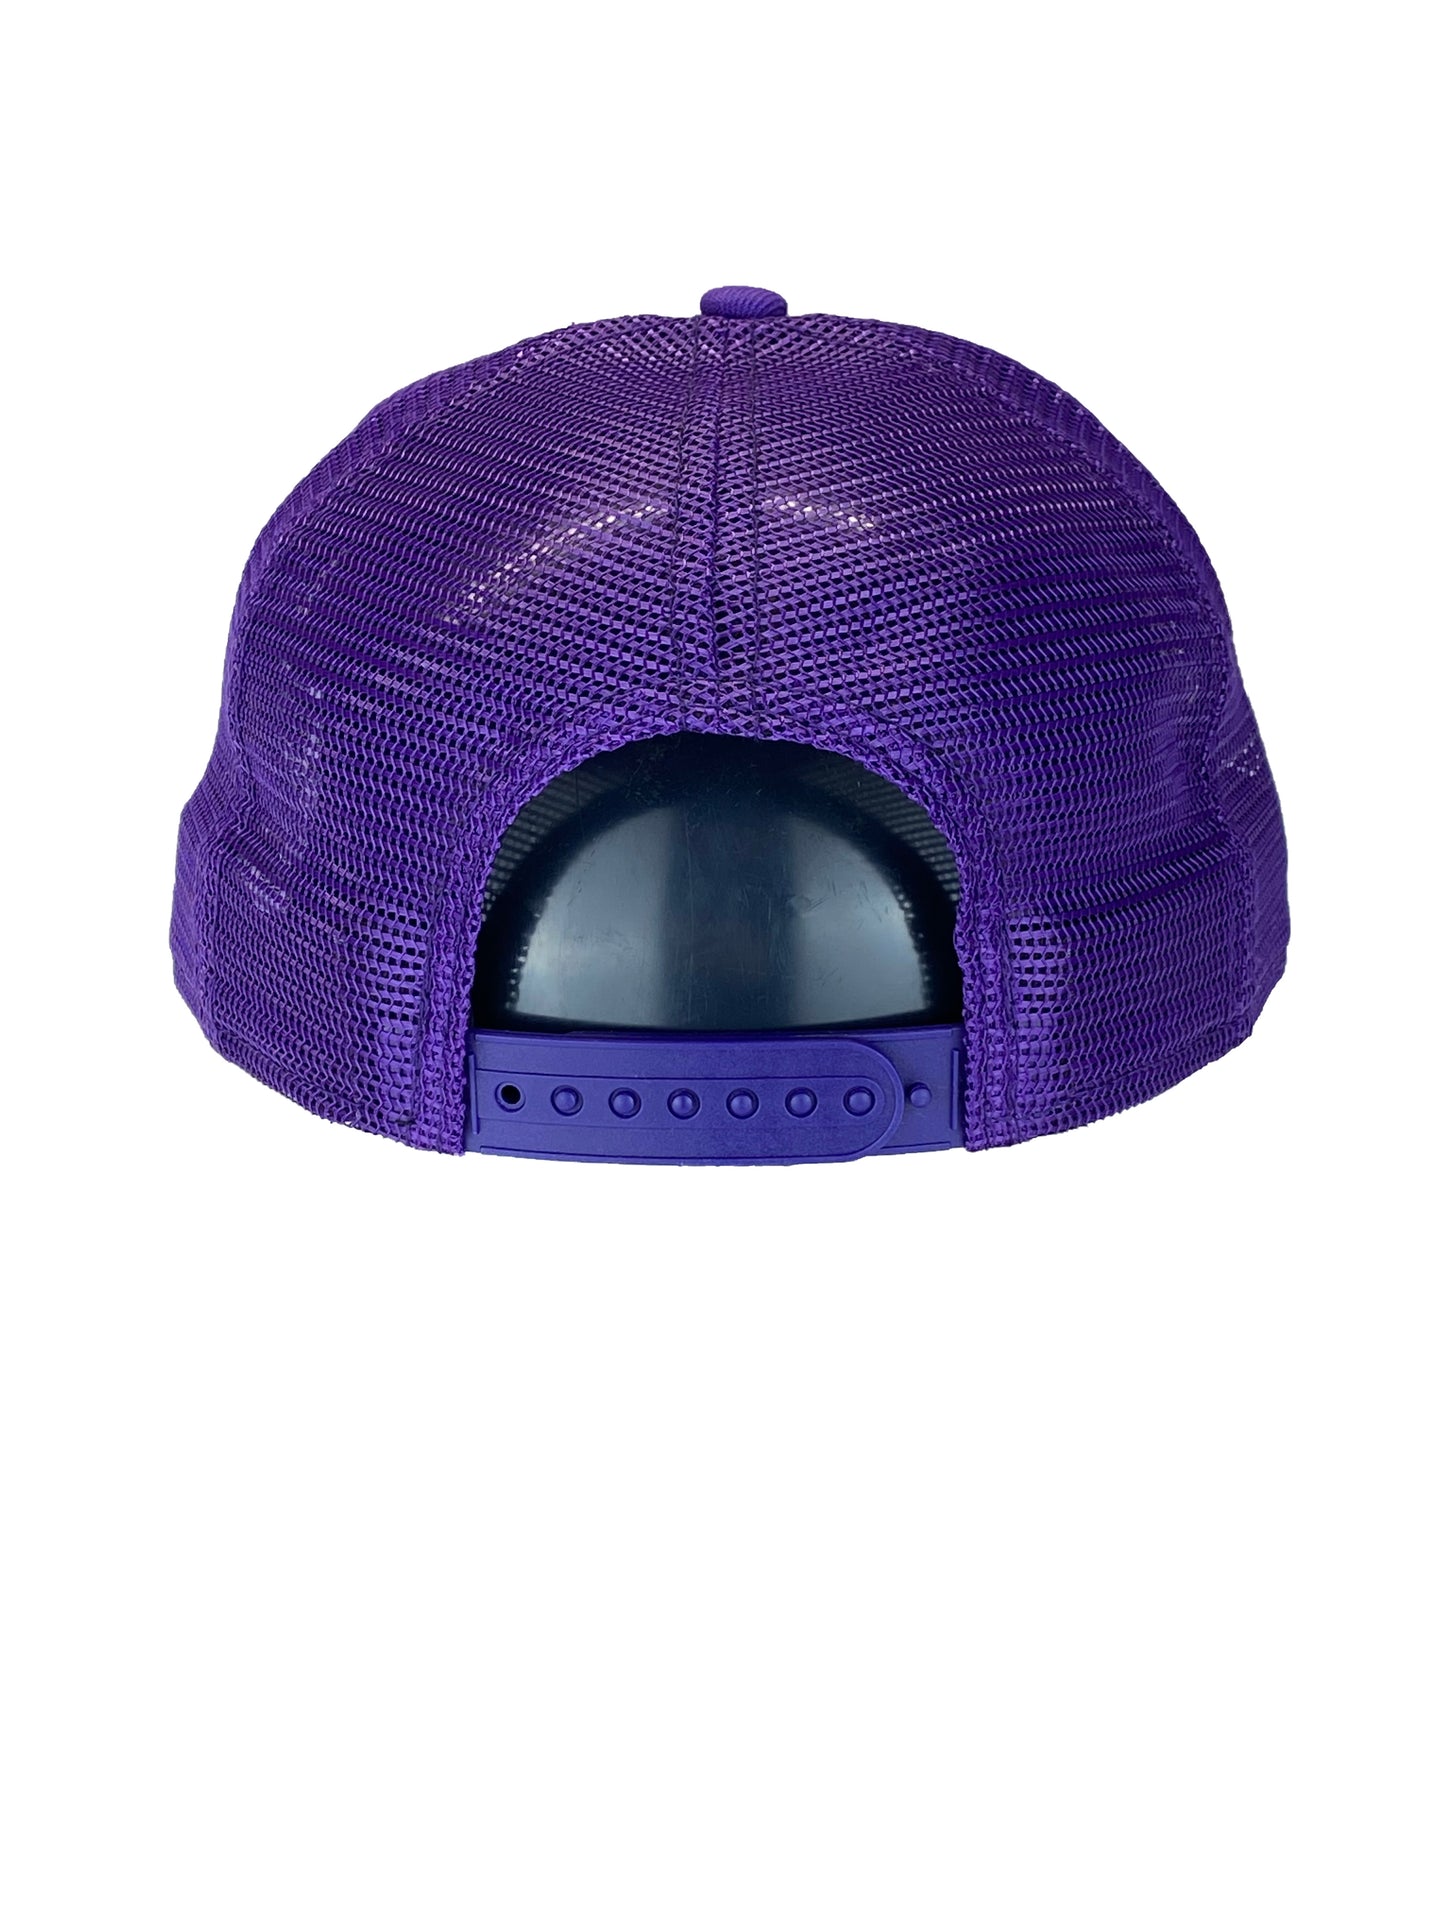 LOS ANGELES LAKERS CLASSIC TRUCKER 9FIFTY SNAPBACK